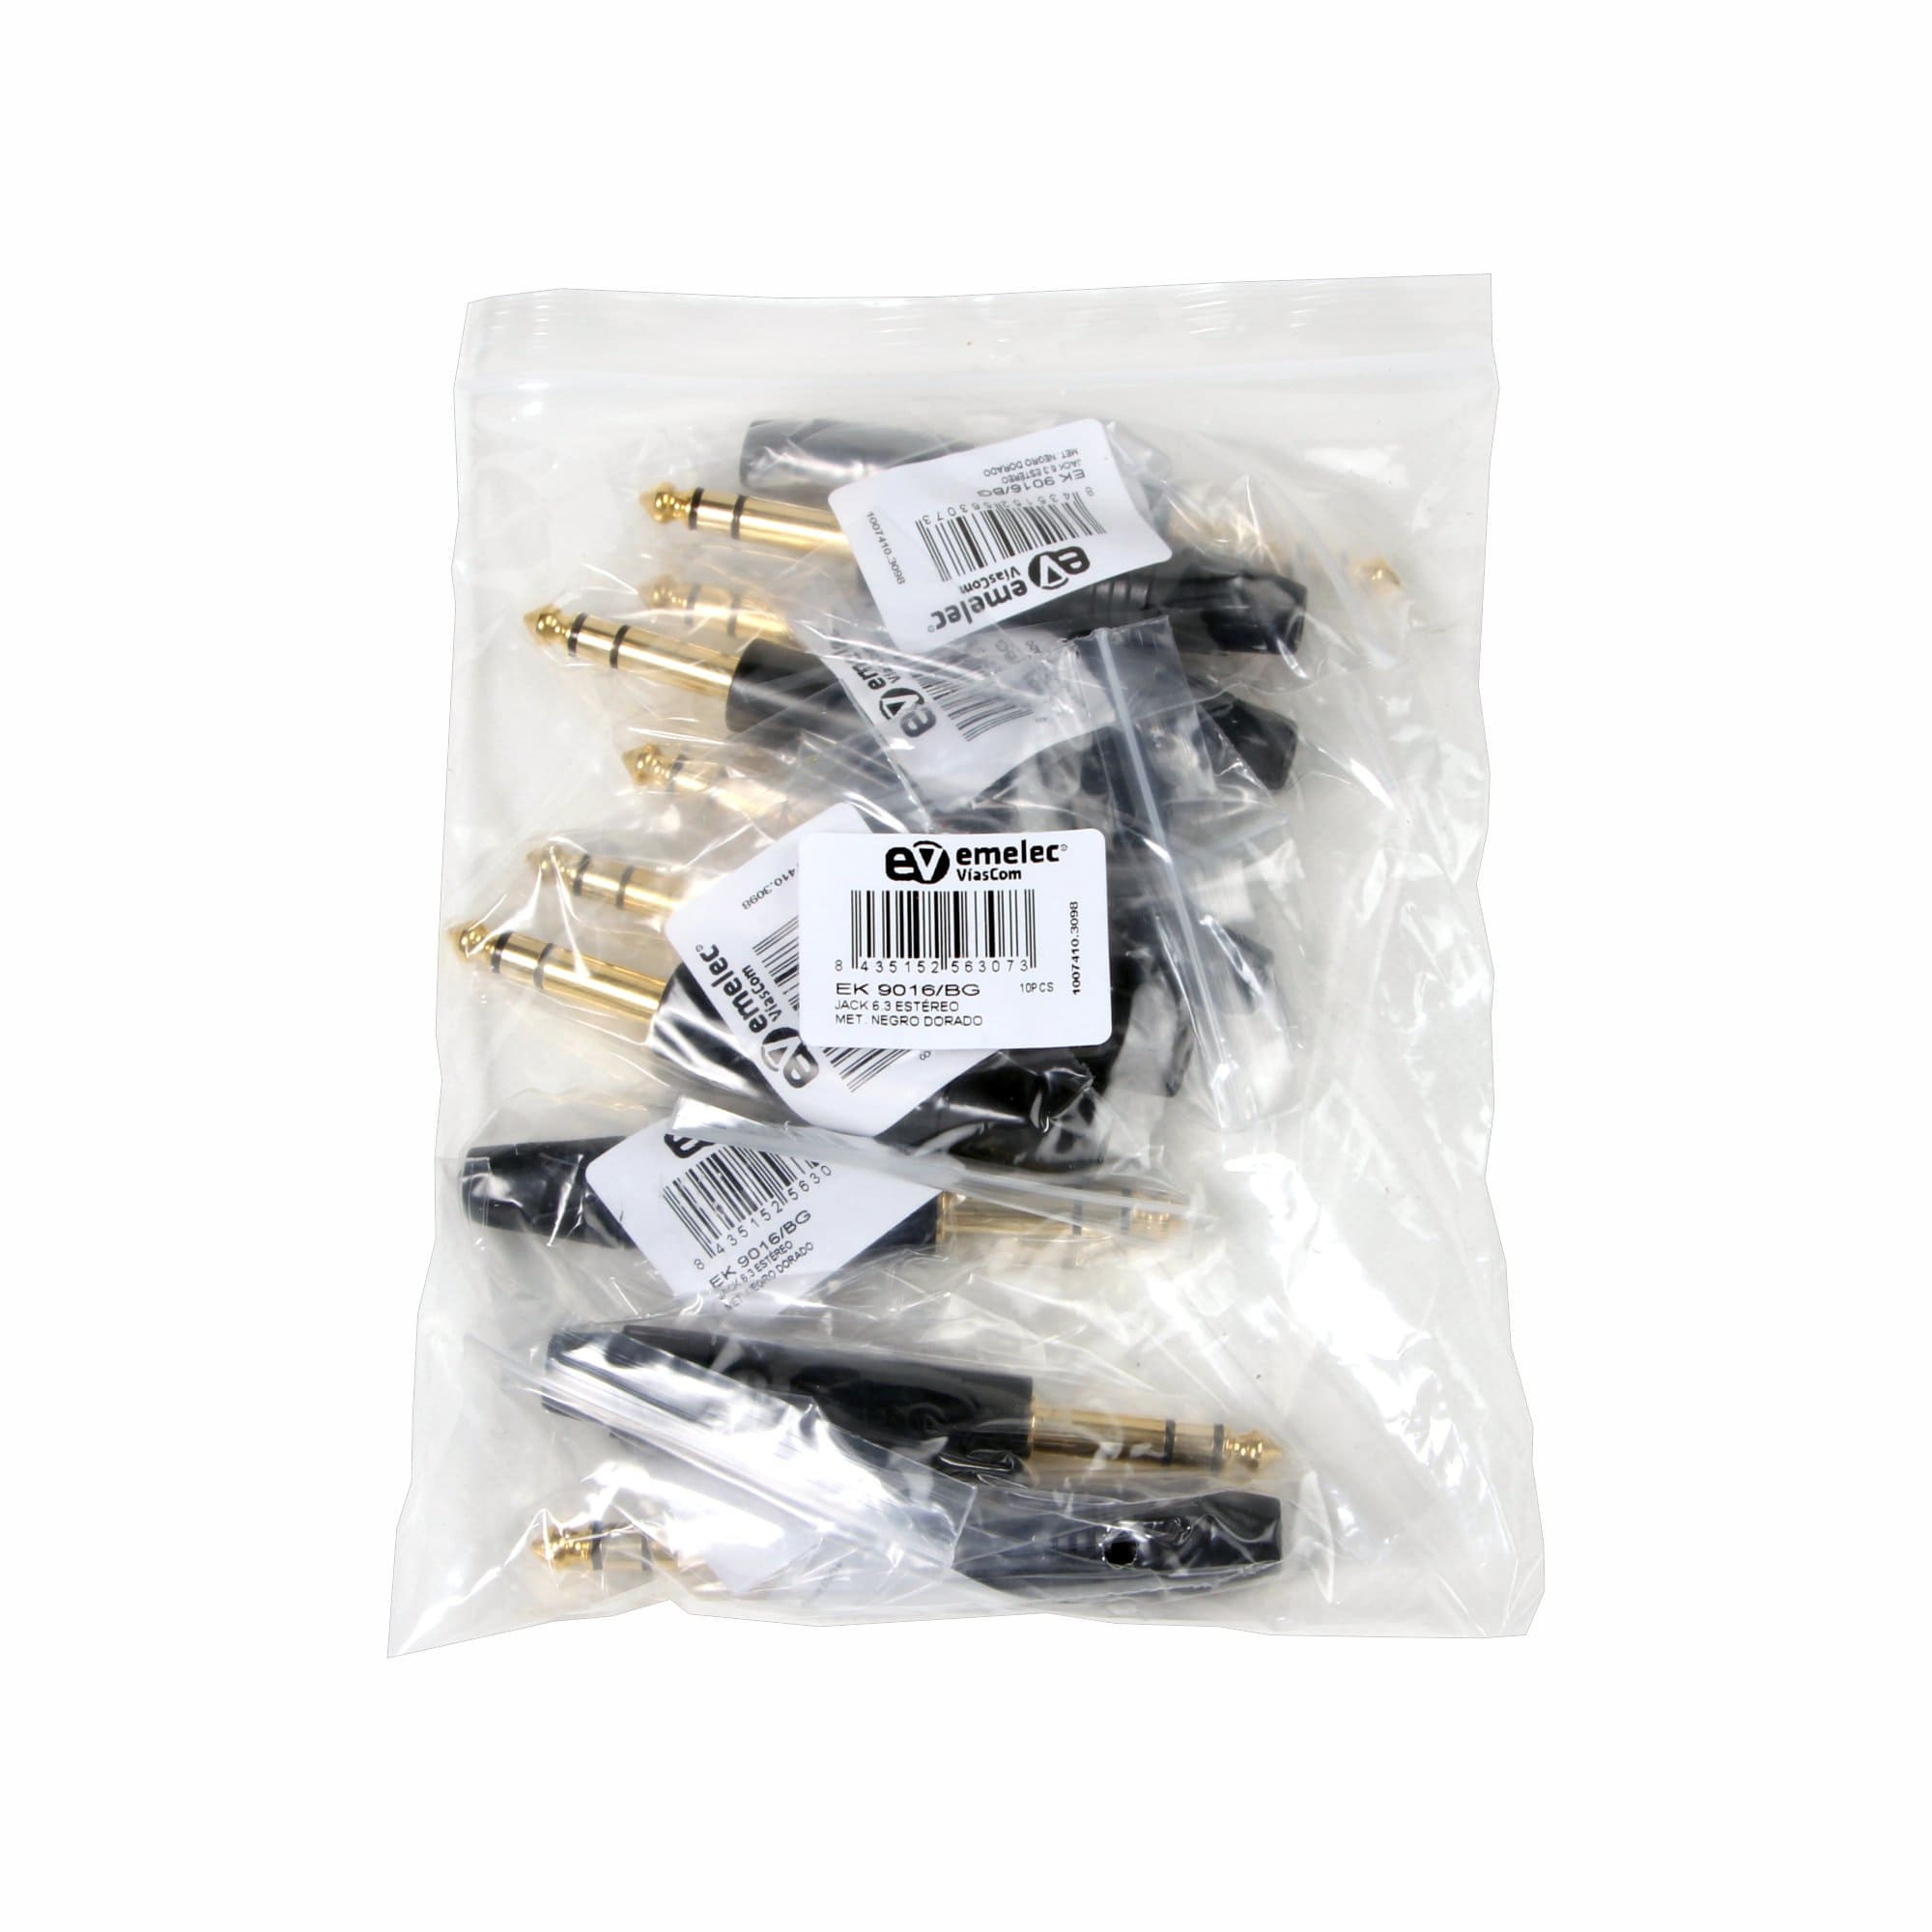 Plastic bag with 10 Jack 6.3 stereo male connectors gold and black from Emelec VíasCom